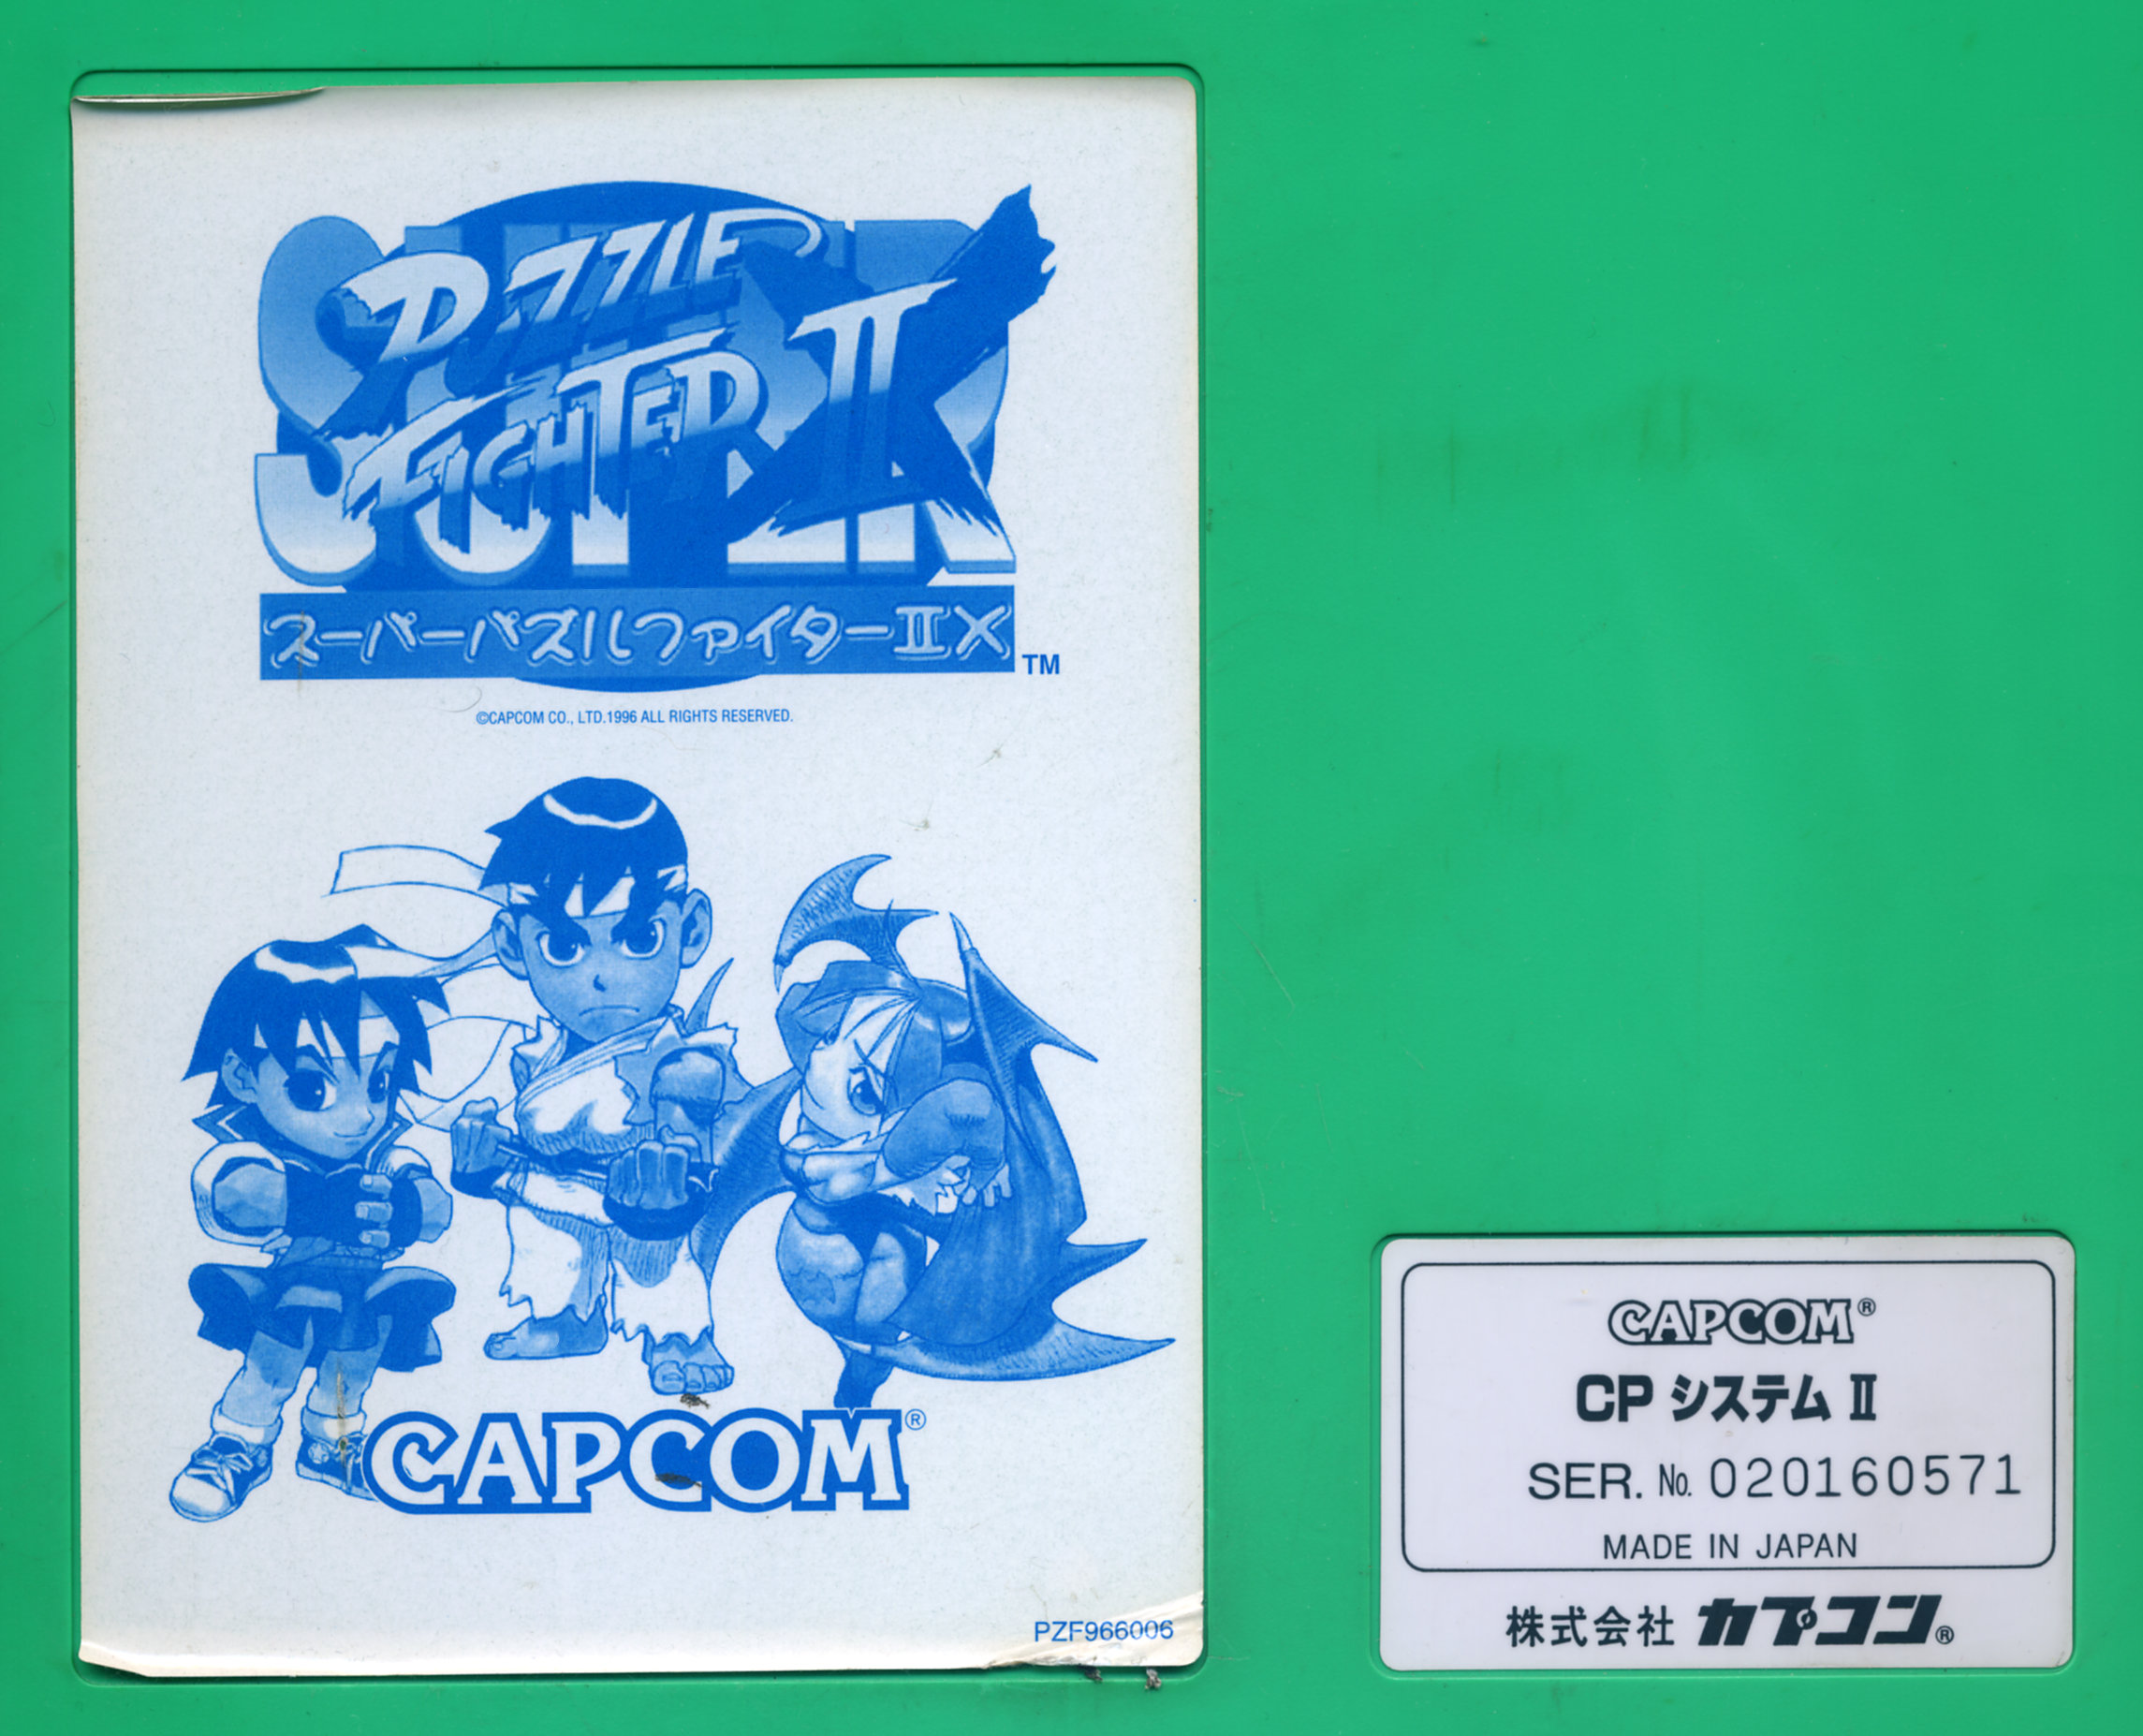 Cps2 super puzzle fighter ii turbo japan label.jpg